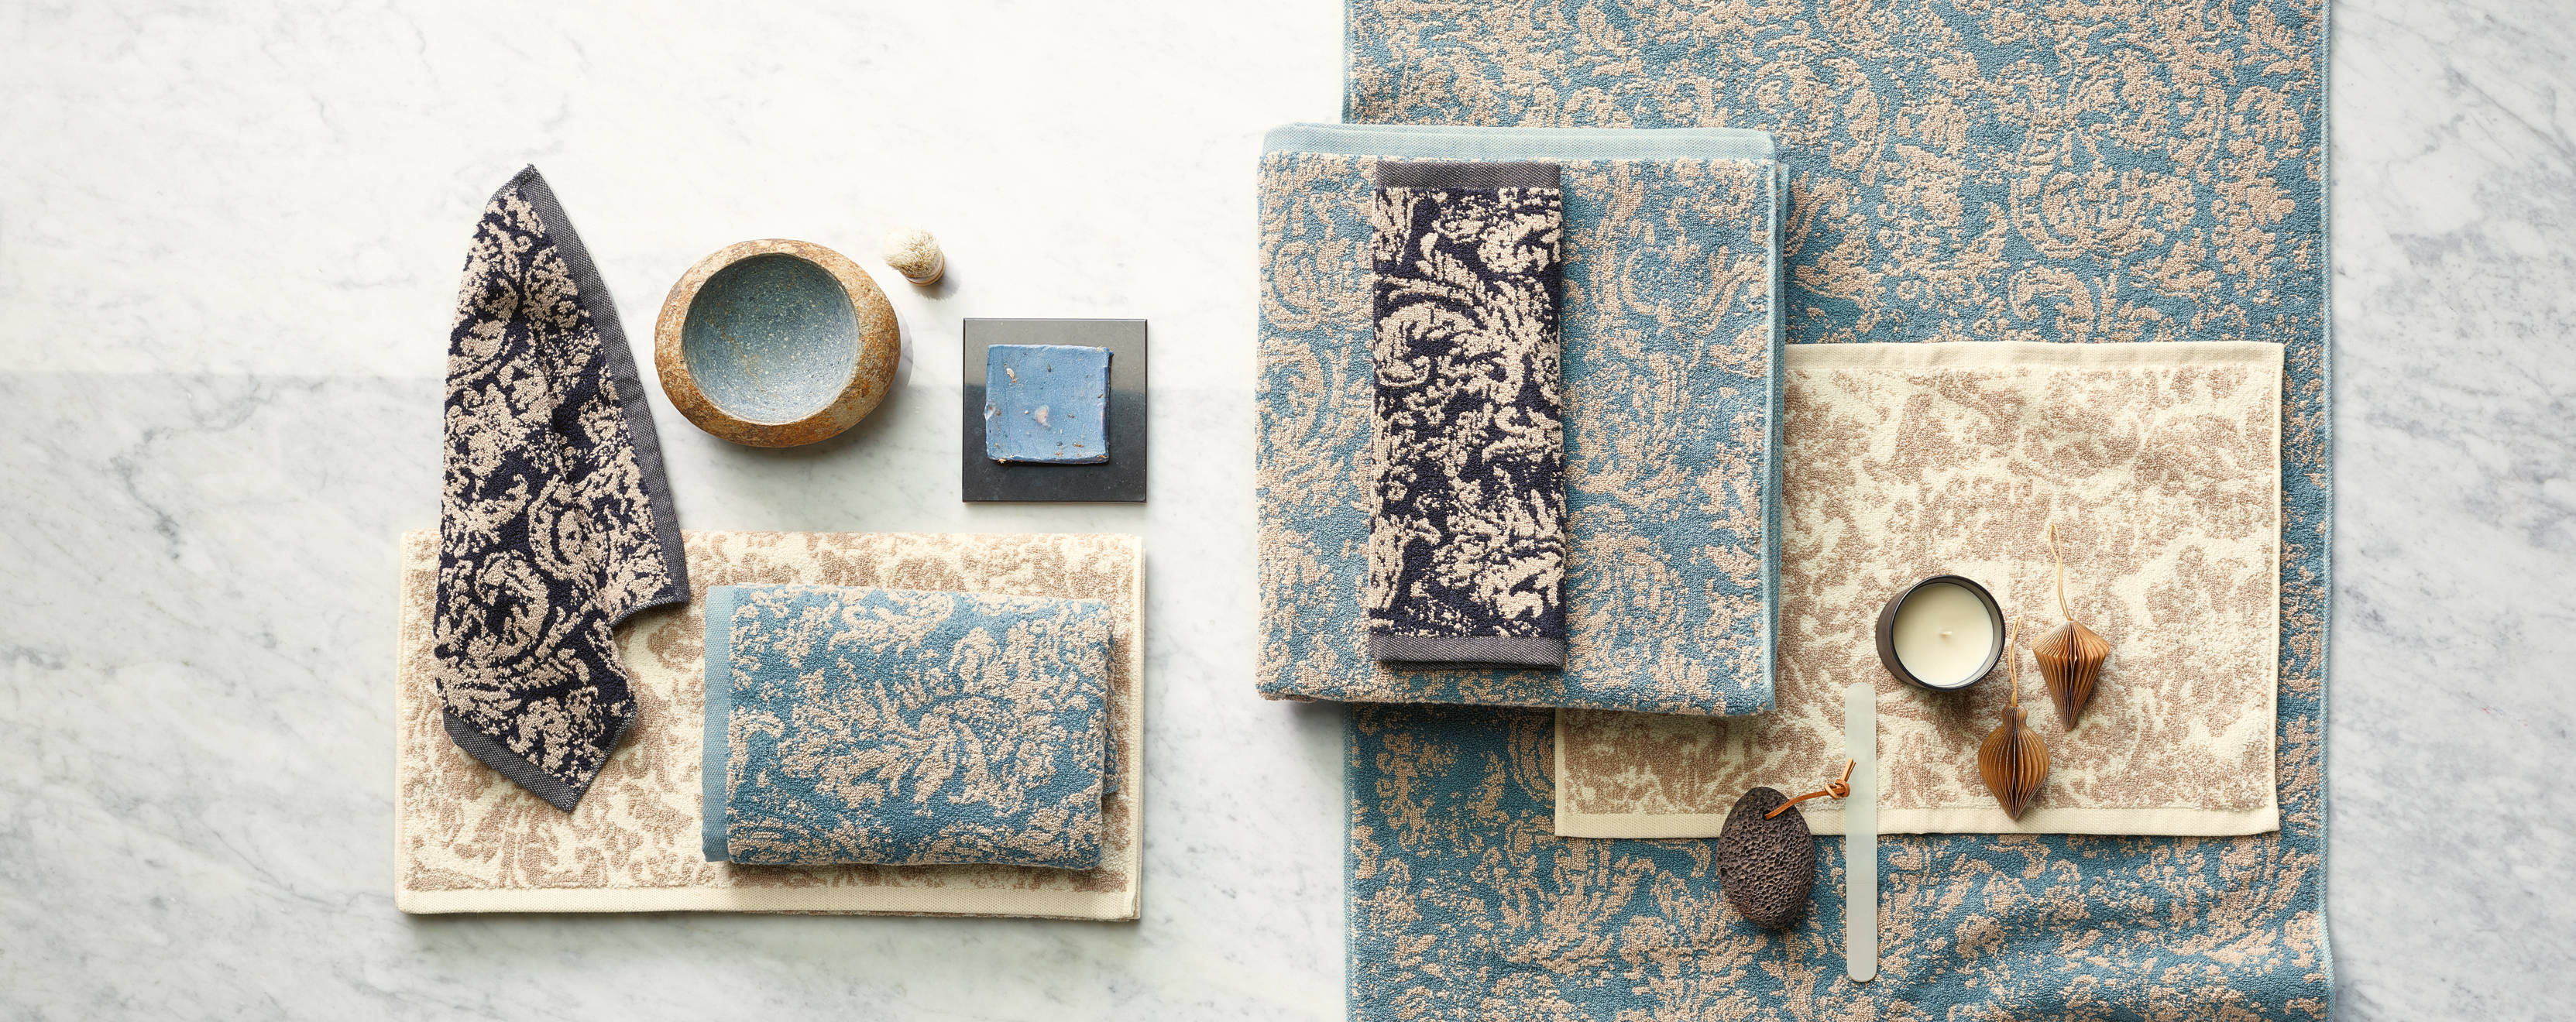 Teal, Sand & Anthrazith - Discover the elegant natural shades of our bath collection